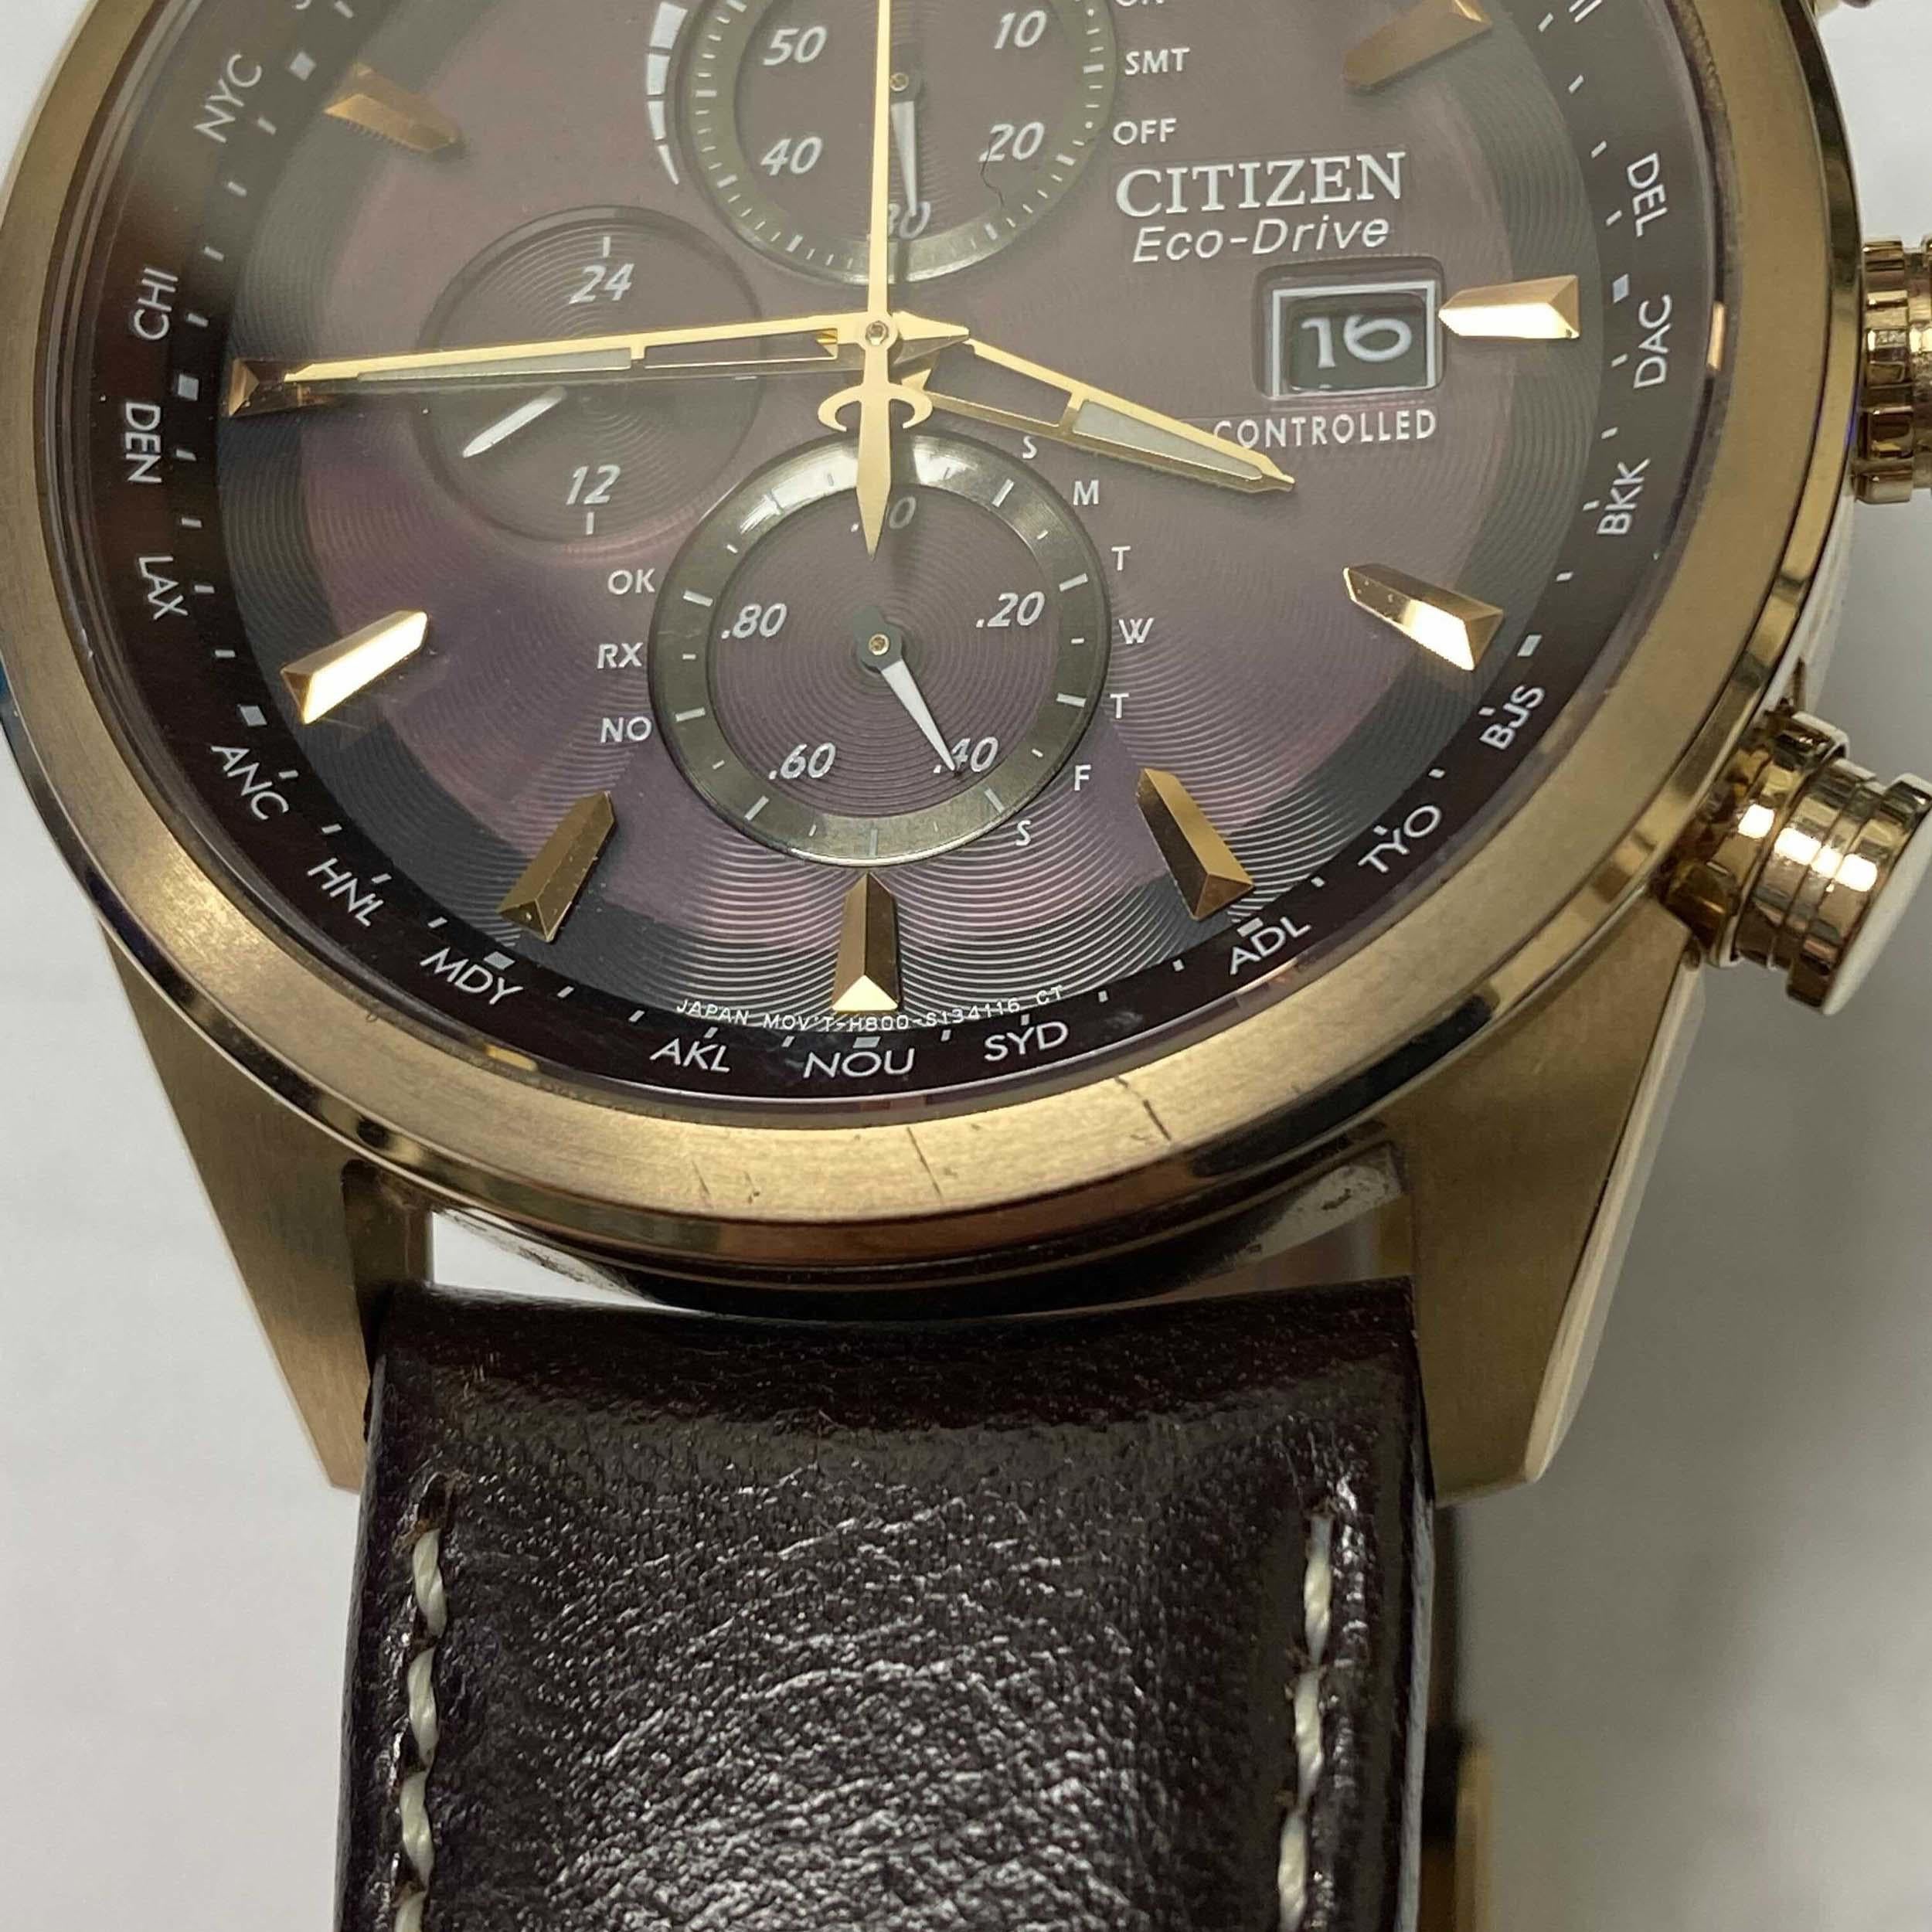 The watch has hairline scratches on the case and signs of use on the band. Comes without the manufacturer's box and papers. Covered by a 1-year Chronostore warranty.
Model Number AT8019-02W
Brand Citizen
Department Men
Style Dress/Formal
Model